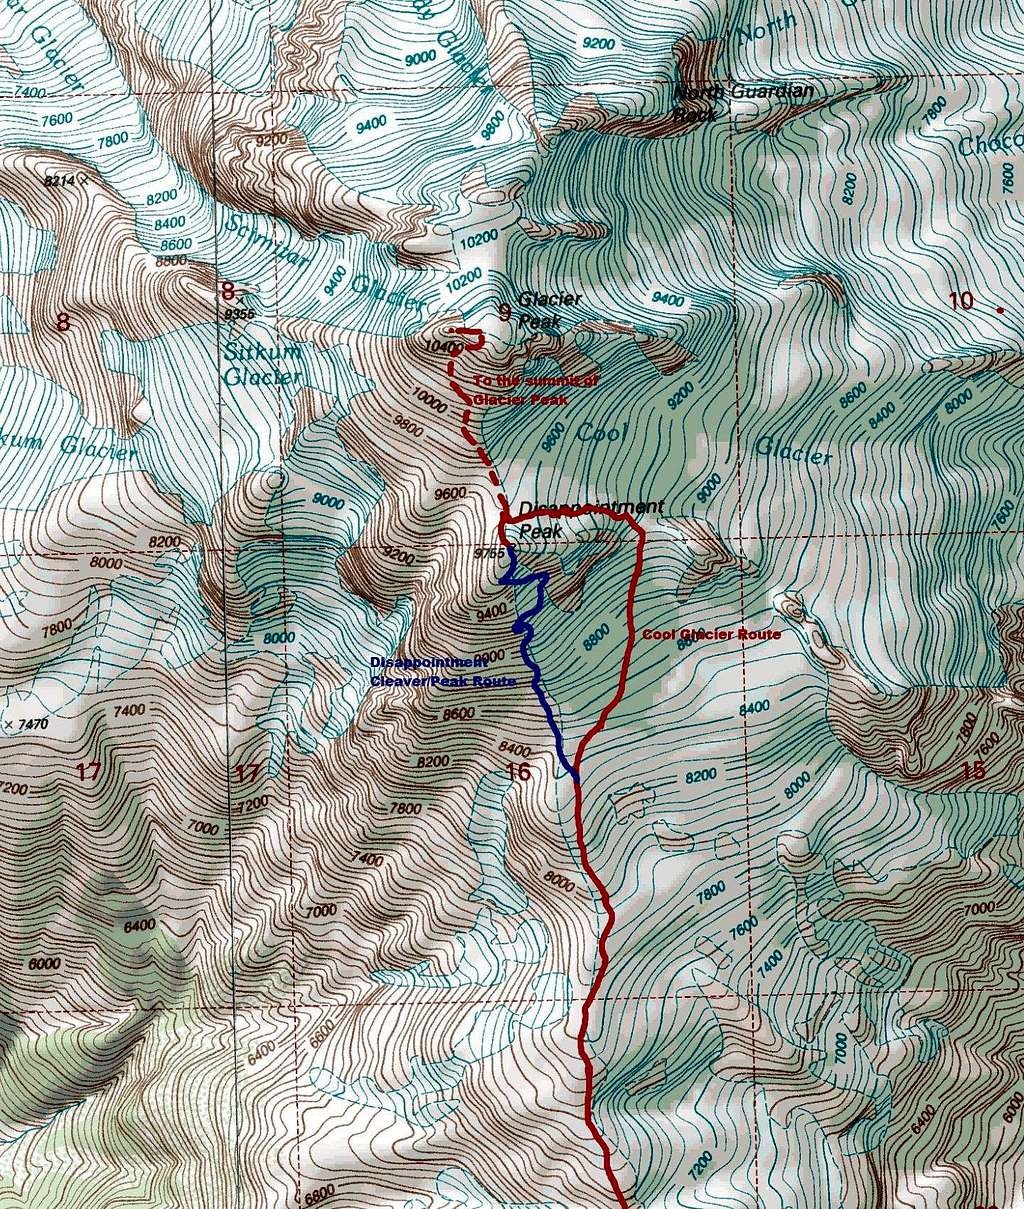 Map of the two prominent routes up Disappointment Peak